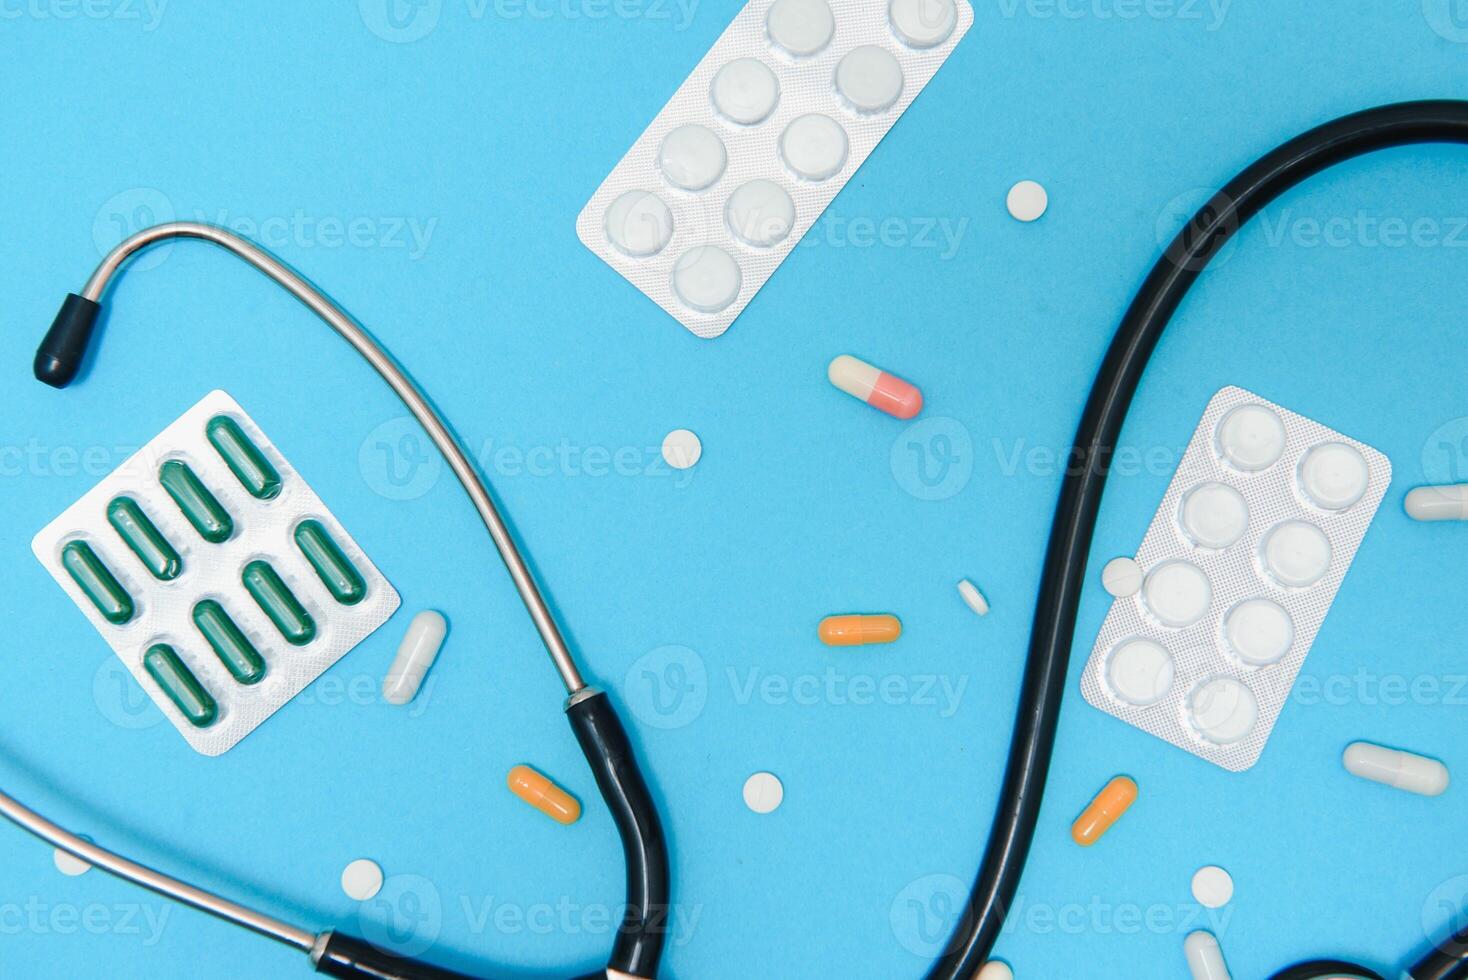 Top view of medicines, work tools and accessories doctor, nurse. Medical set - Tablets, thermometer, syringe, ampoules, adhesive plaster and statoscope on a blue background. Flat lay. photo